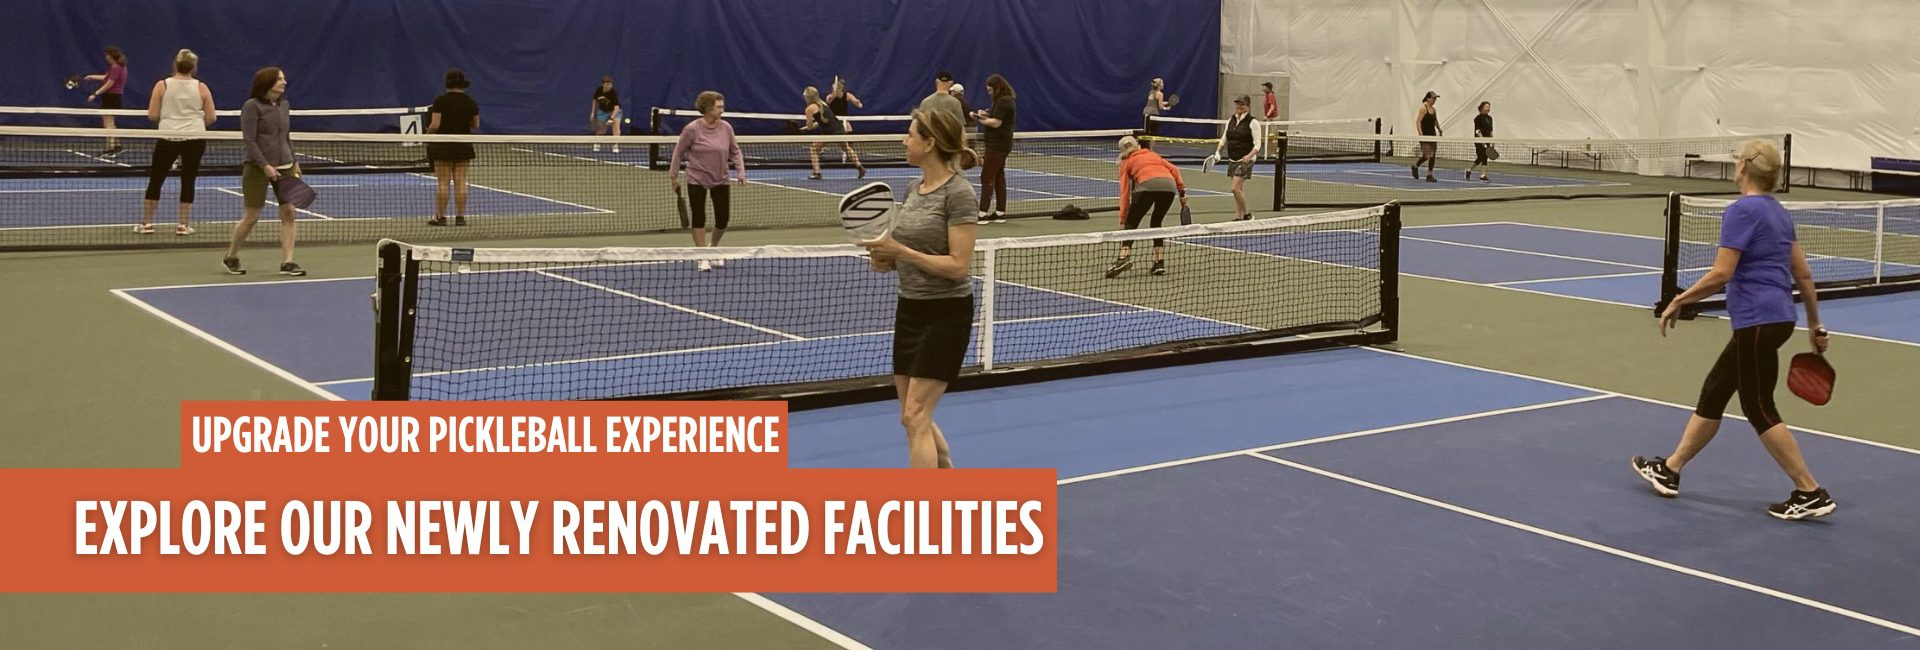 missoula racquet club gym near me with pickleball courts